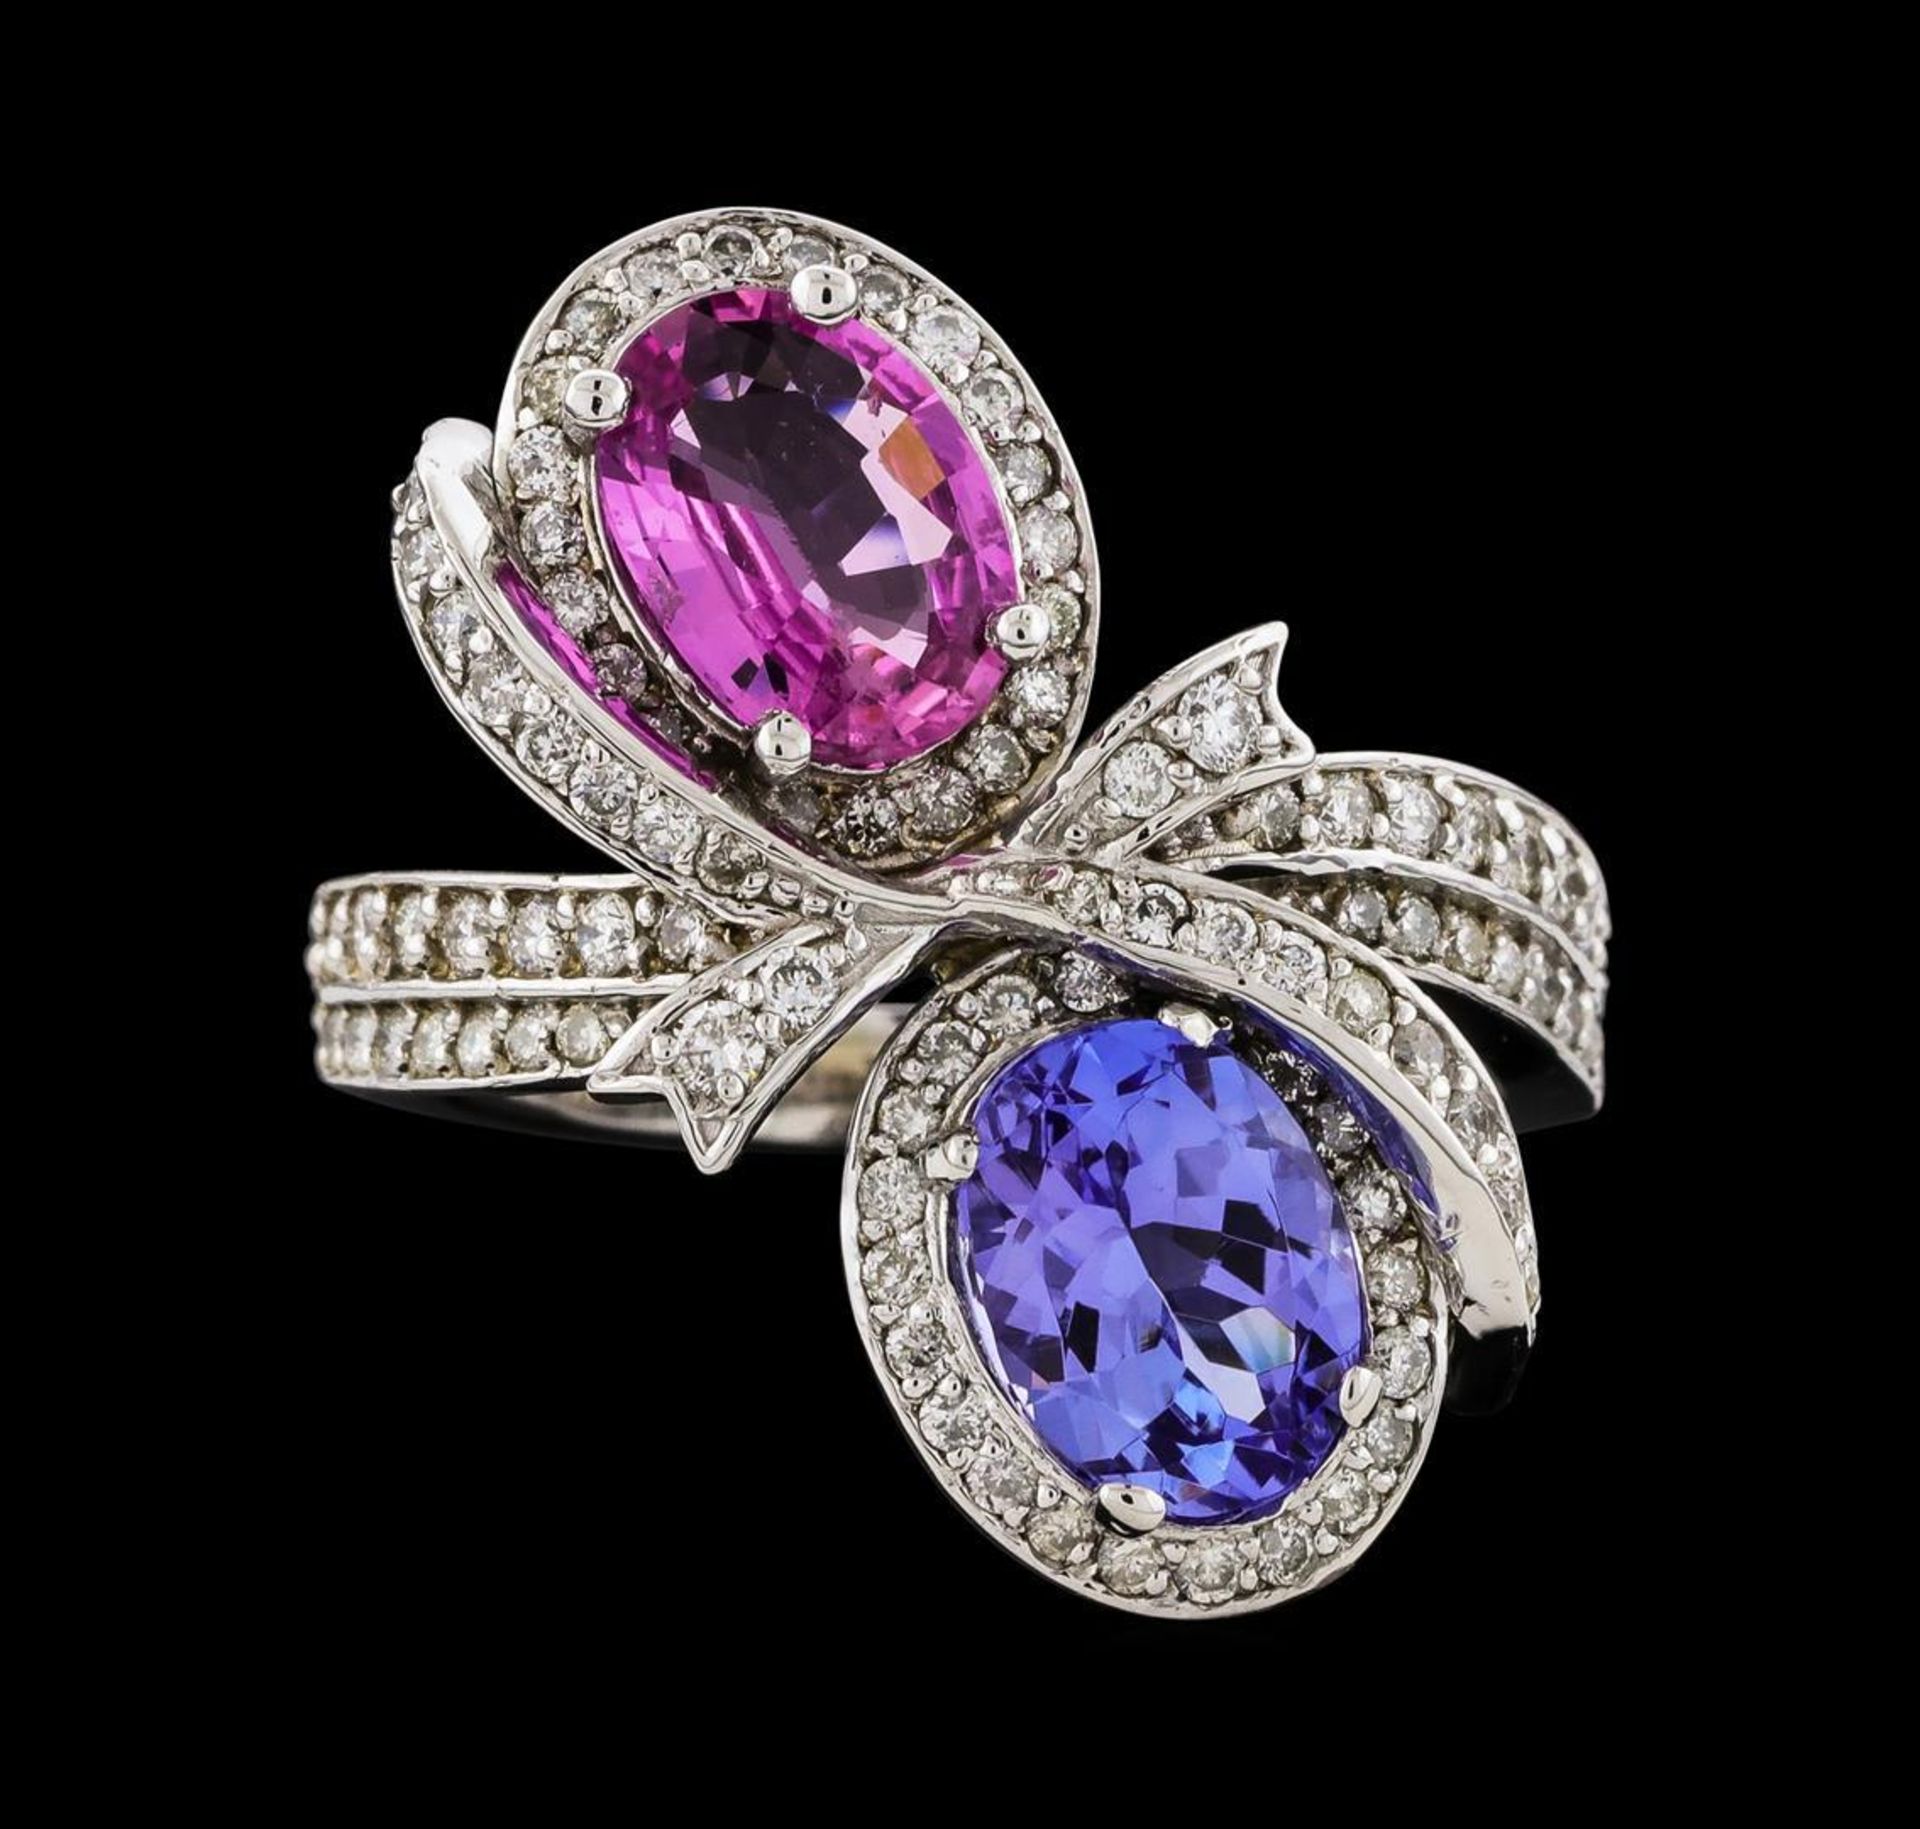 2.55 ctw Tanzanite, Pink Sapphire, and Diamond Ring - 14KT White Gold - Image 2 of 6